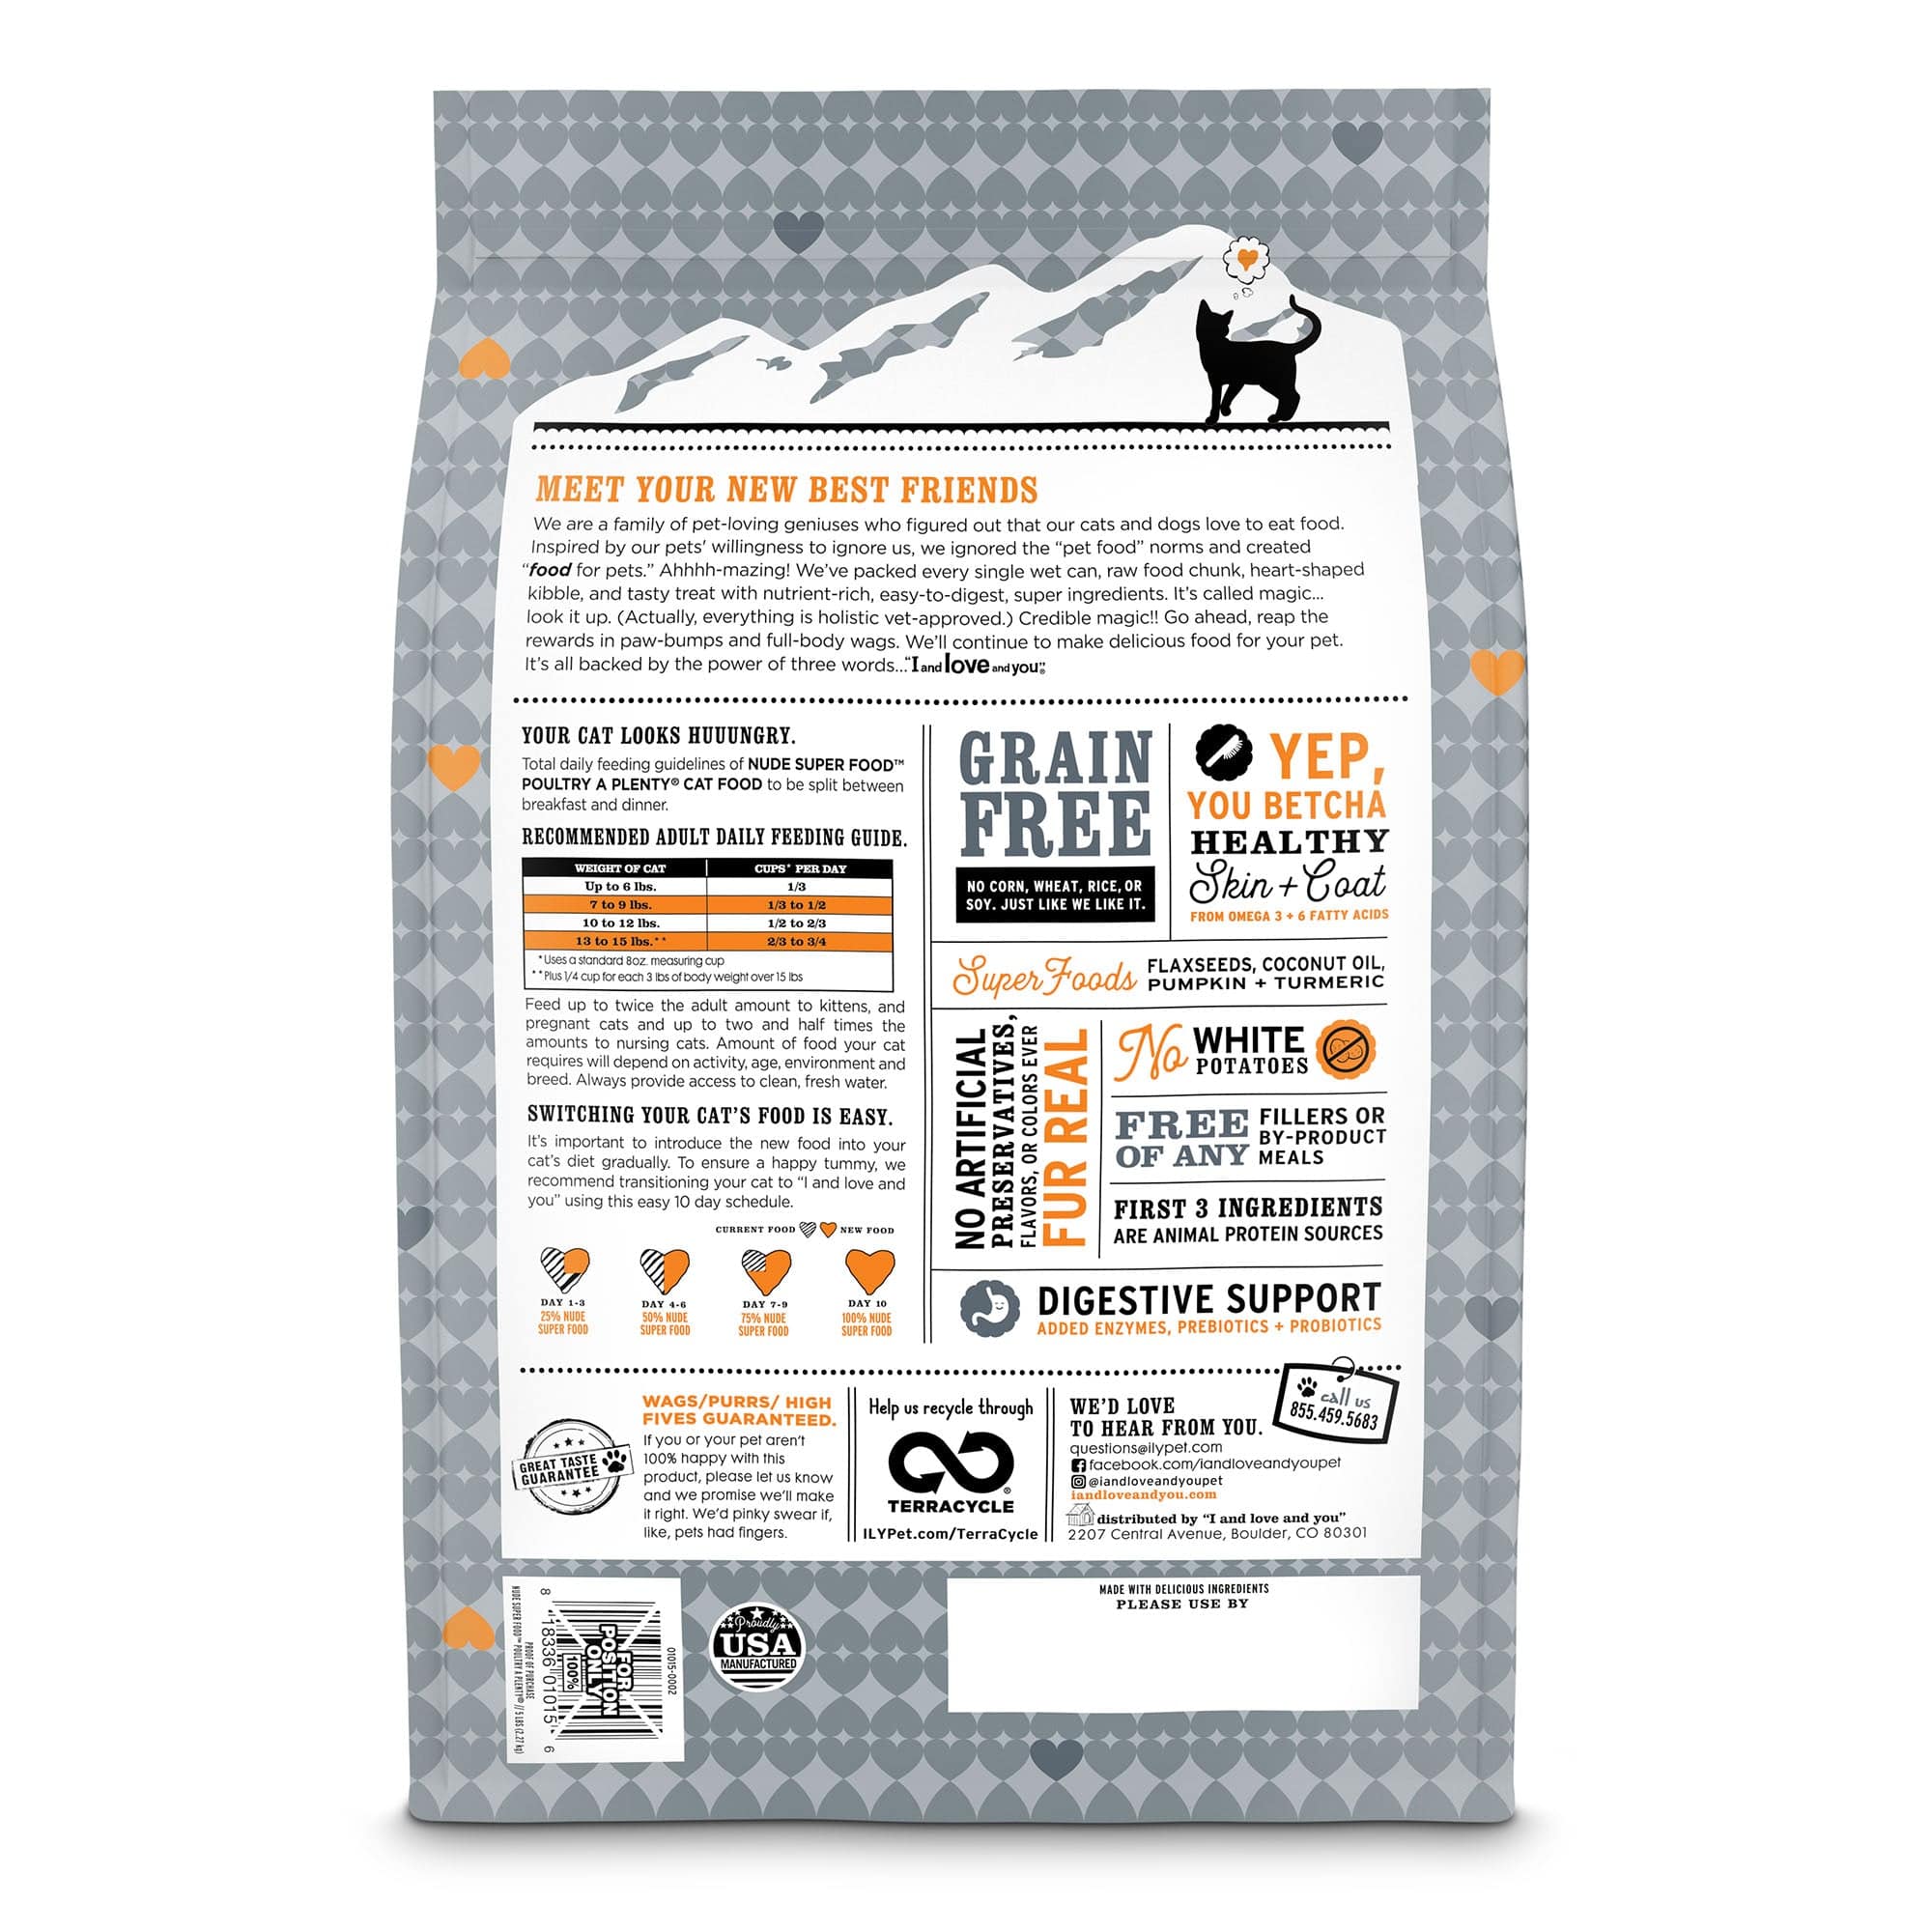 Nude Super Food - Poultry a Plenty bag with high-protein kibble for cats, featuring meat, superfoods, and digestive enzymes.